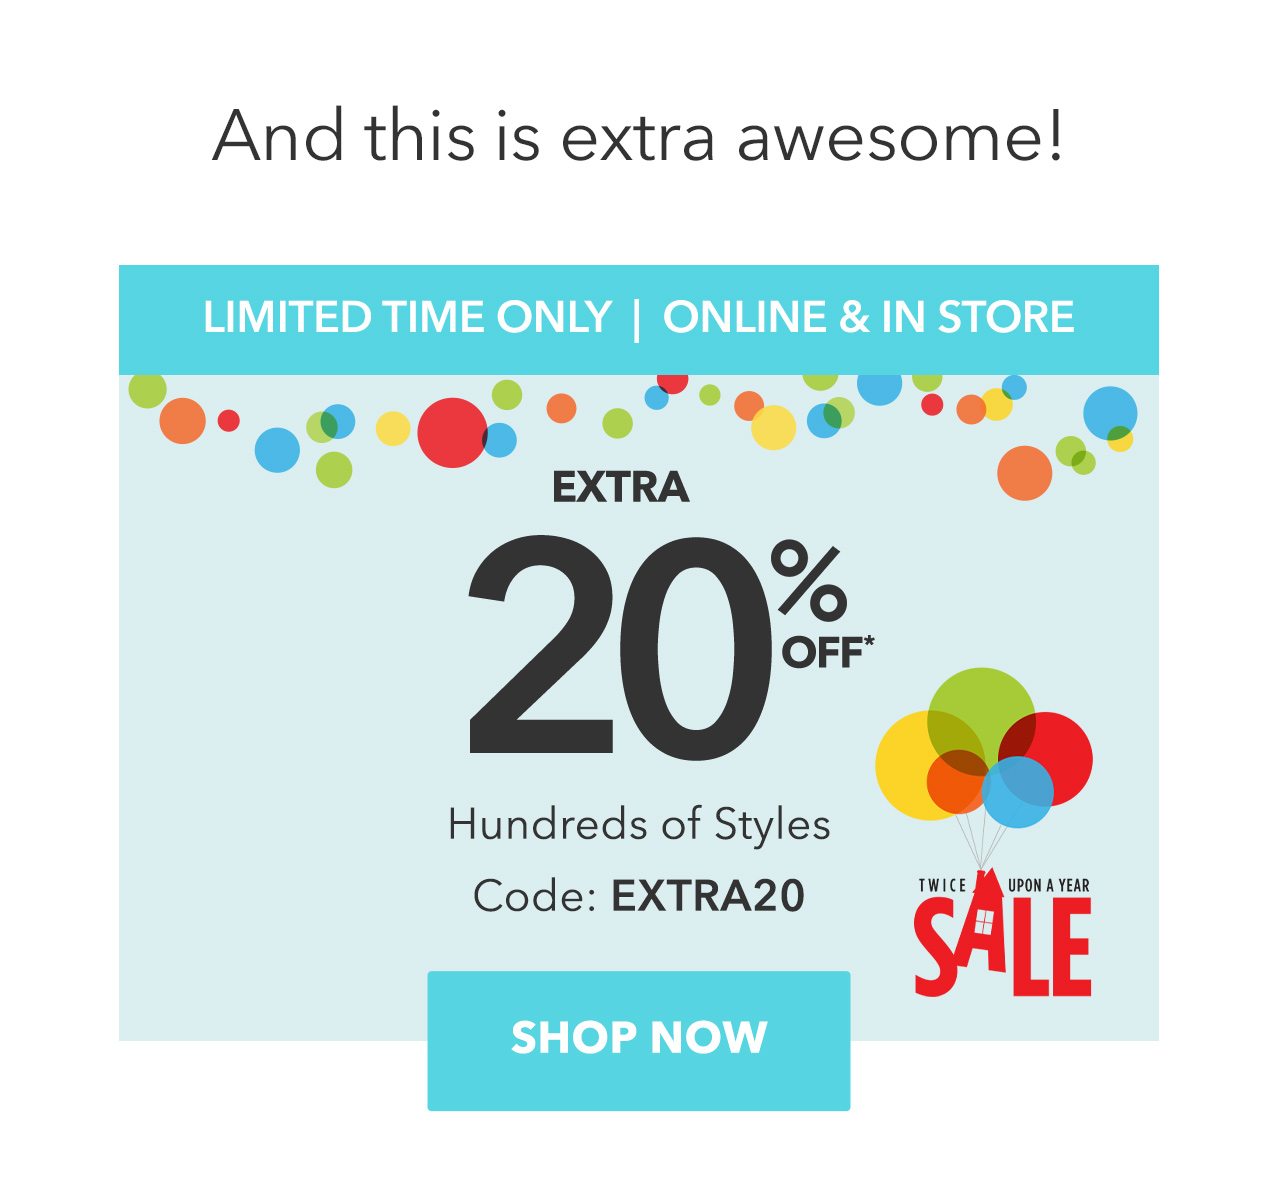 And this is extra awesome! | LIMITED TIME ONLY | ONLINE & IN STORE | Twice Upon a Year Sale | Extra 20% Off Hundreds of Styles | Code: EXTRA20 | Shop Now 